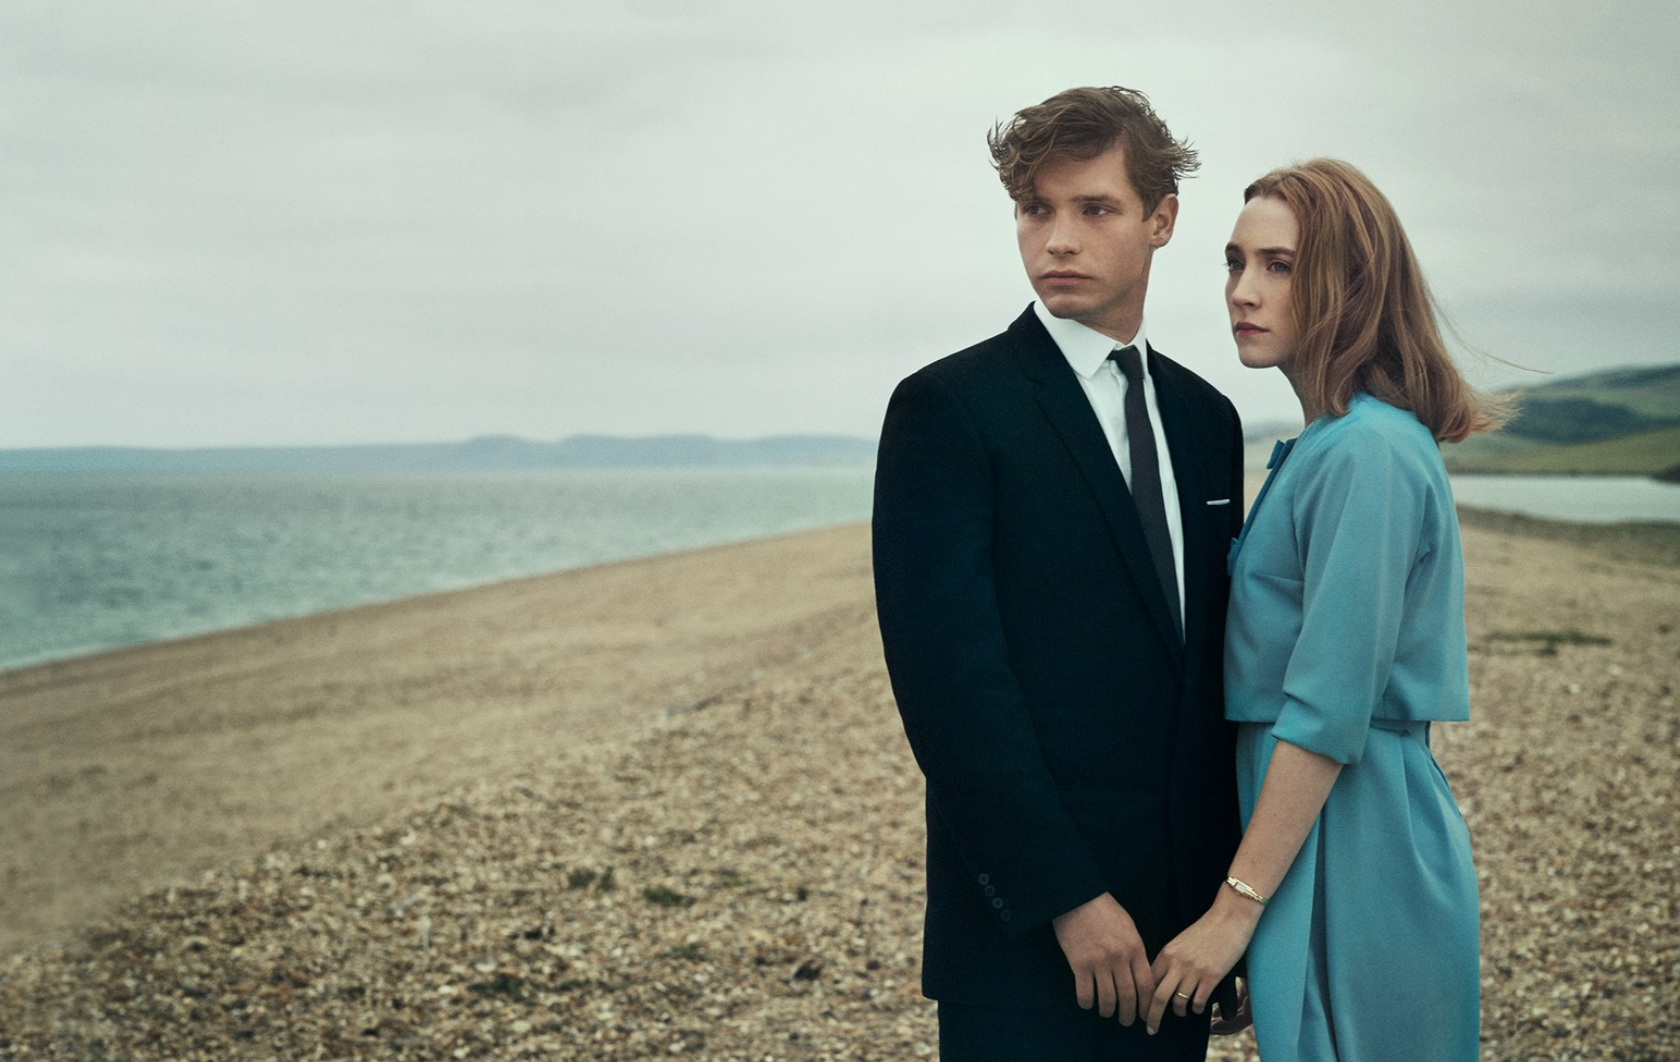 Review: On Chesil Beach: the ending couldn't come soon enough